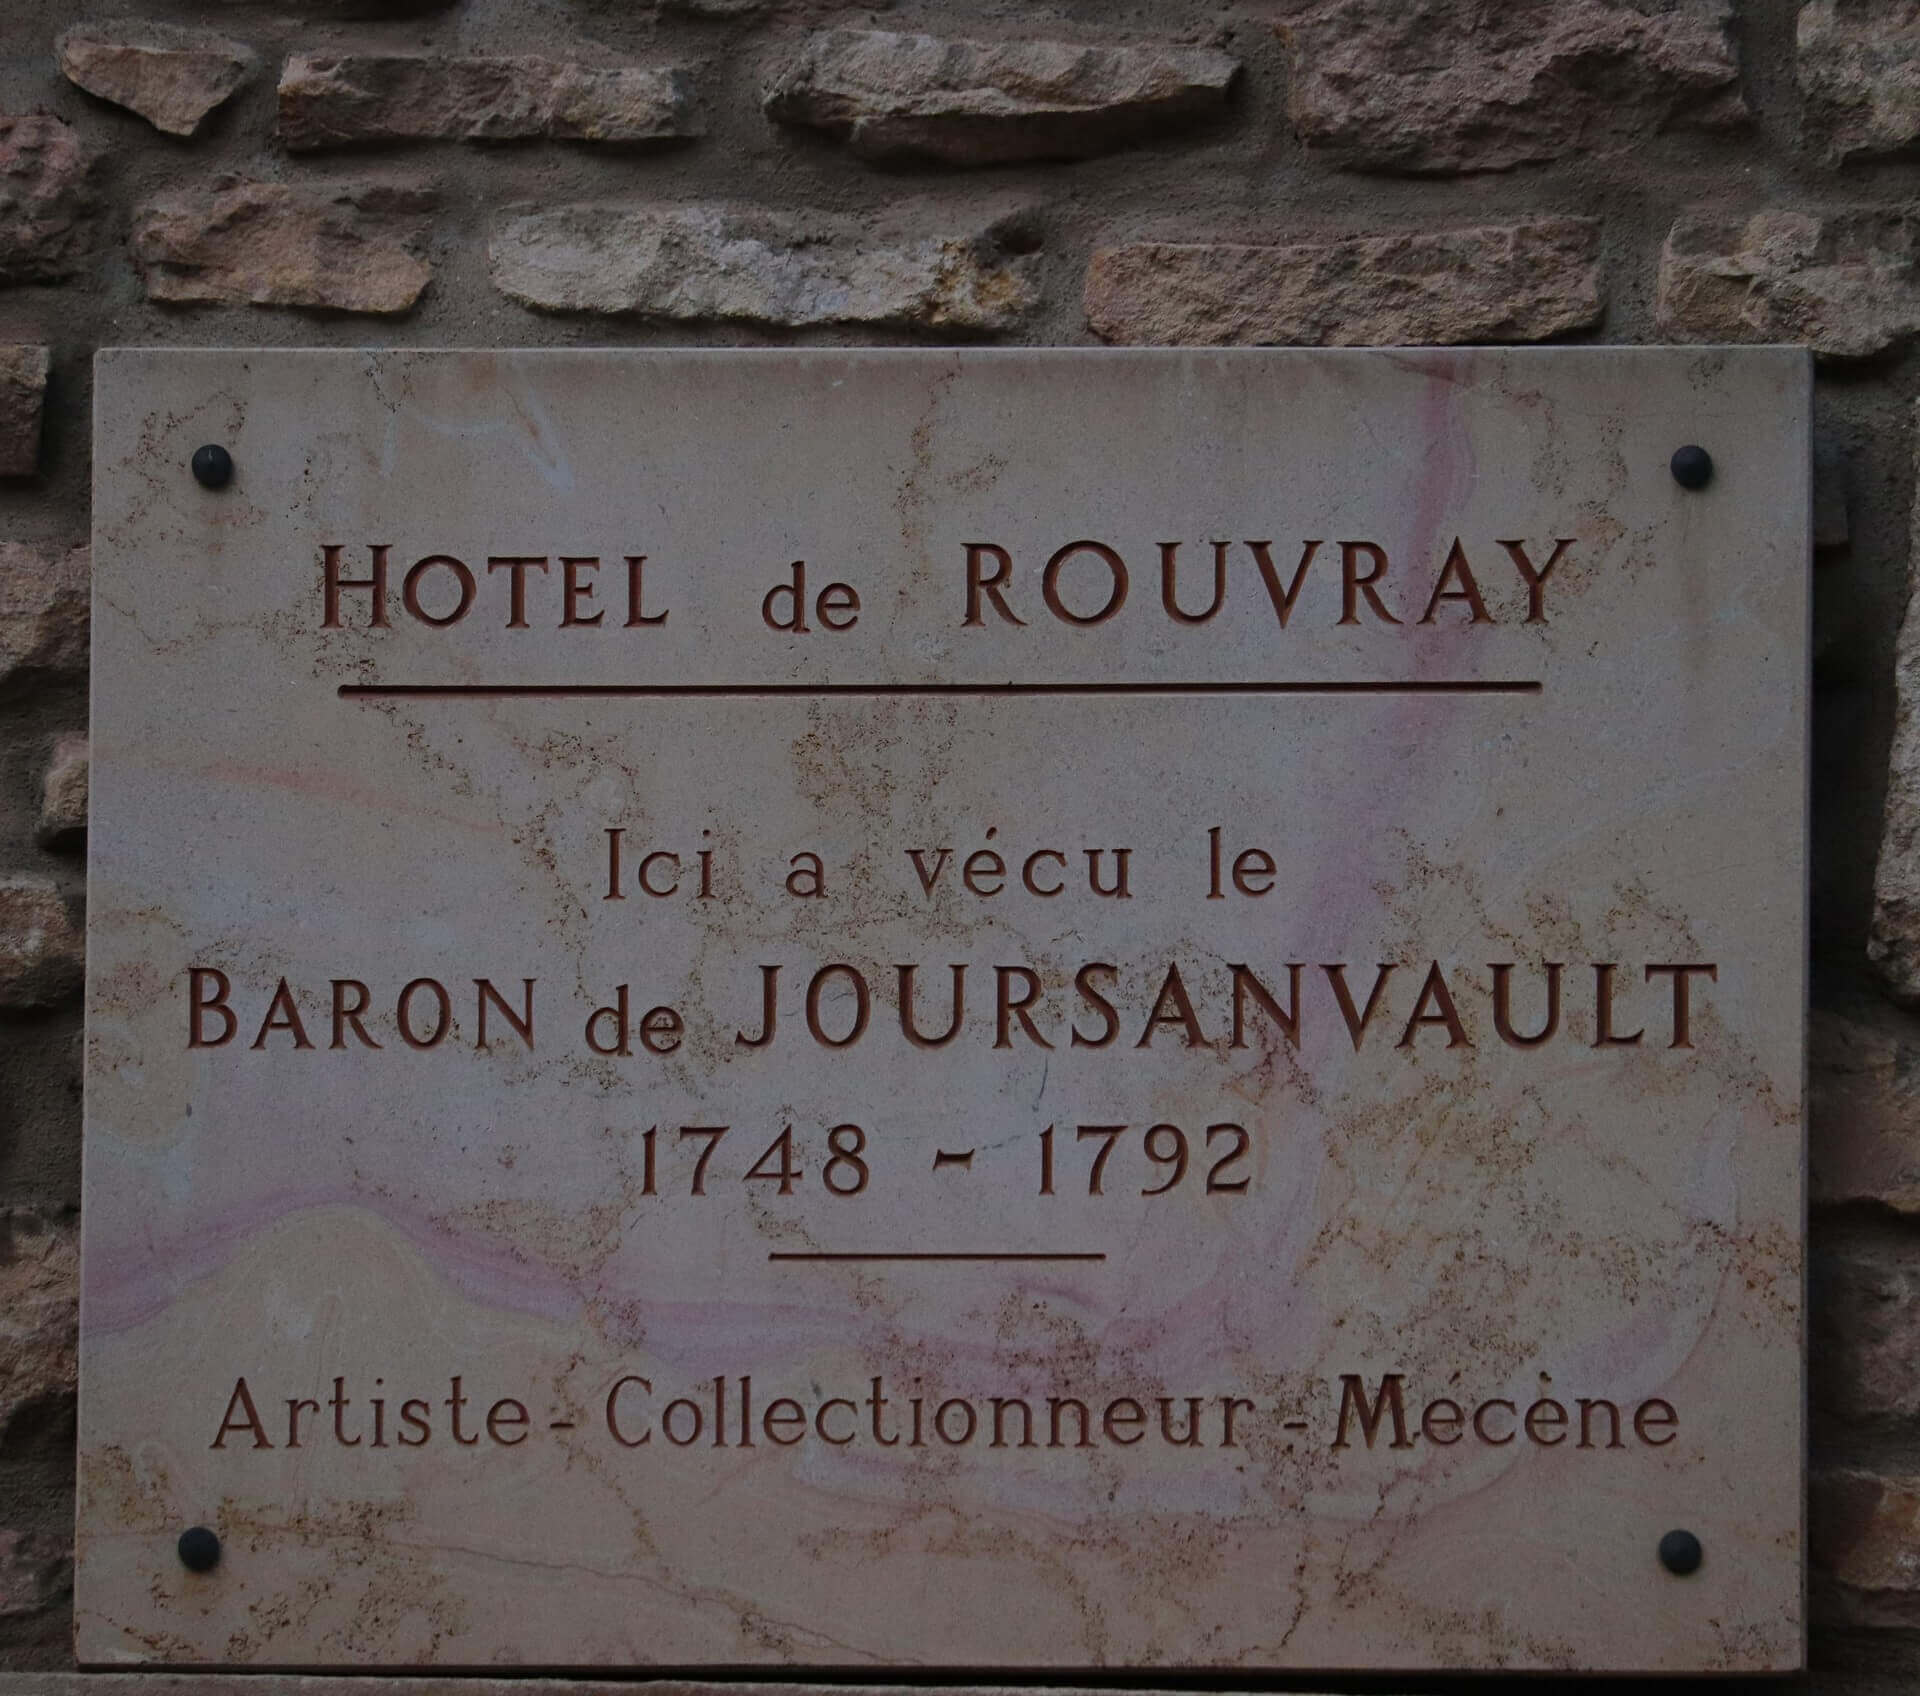 Sensation Vin's tasting rooms are located in Beaune's historic center, inside Hôtel de Rouvray.